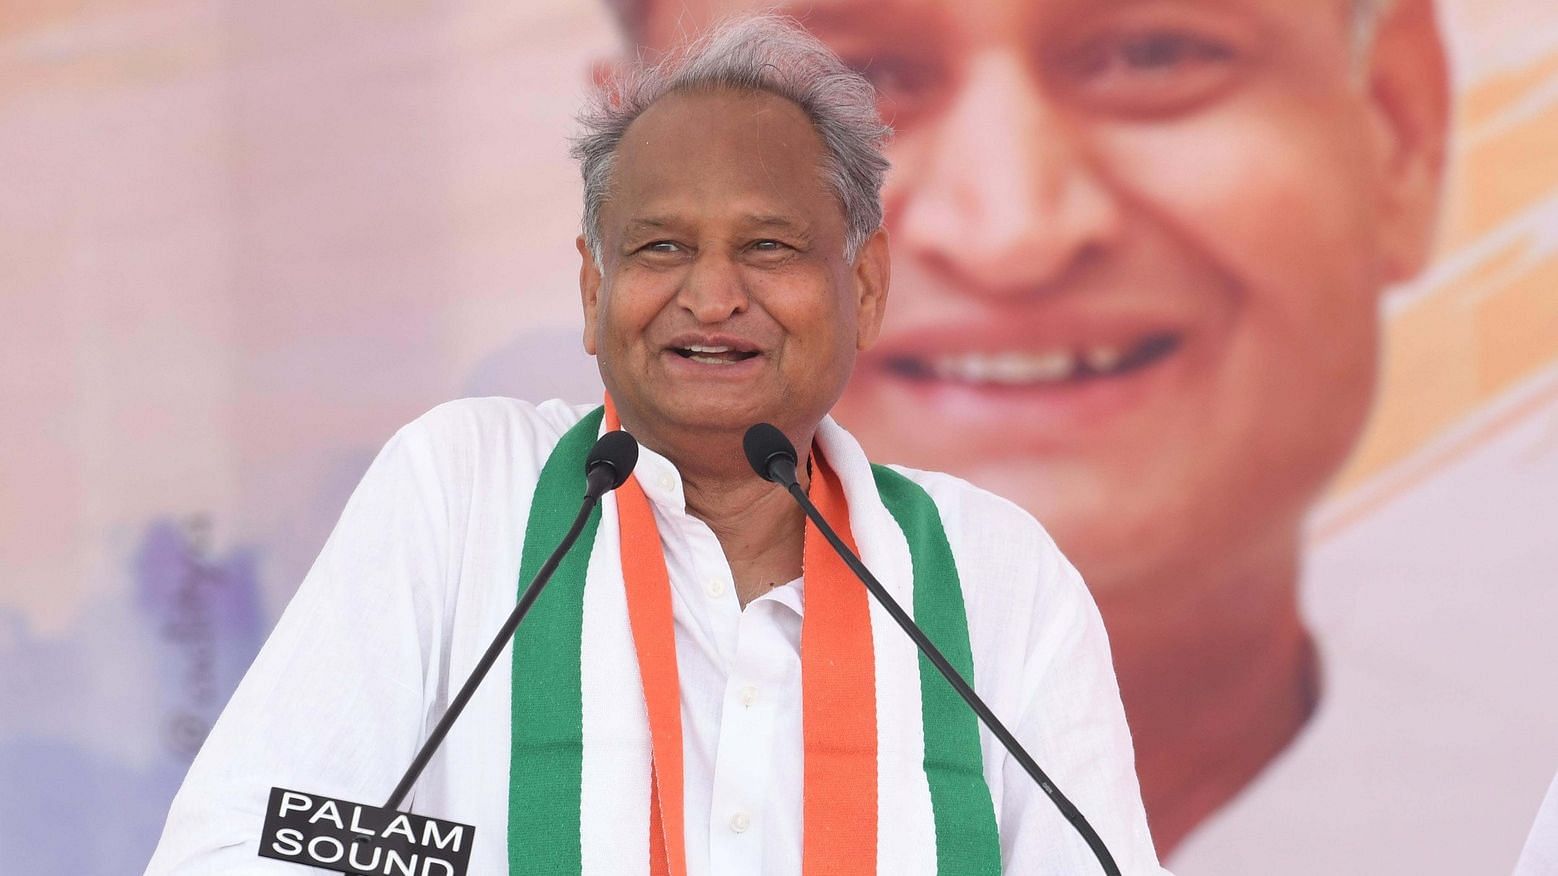 <div class="paragraphs"><p>Sources suggest that Rajasthan Chief Minister Ashok Gehlot may drop out of the Congress president's race.</p></div>